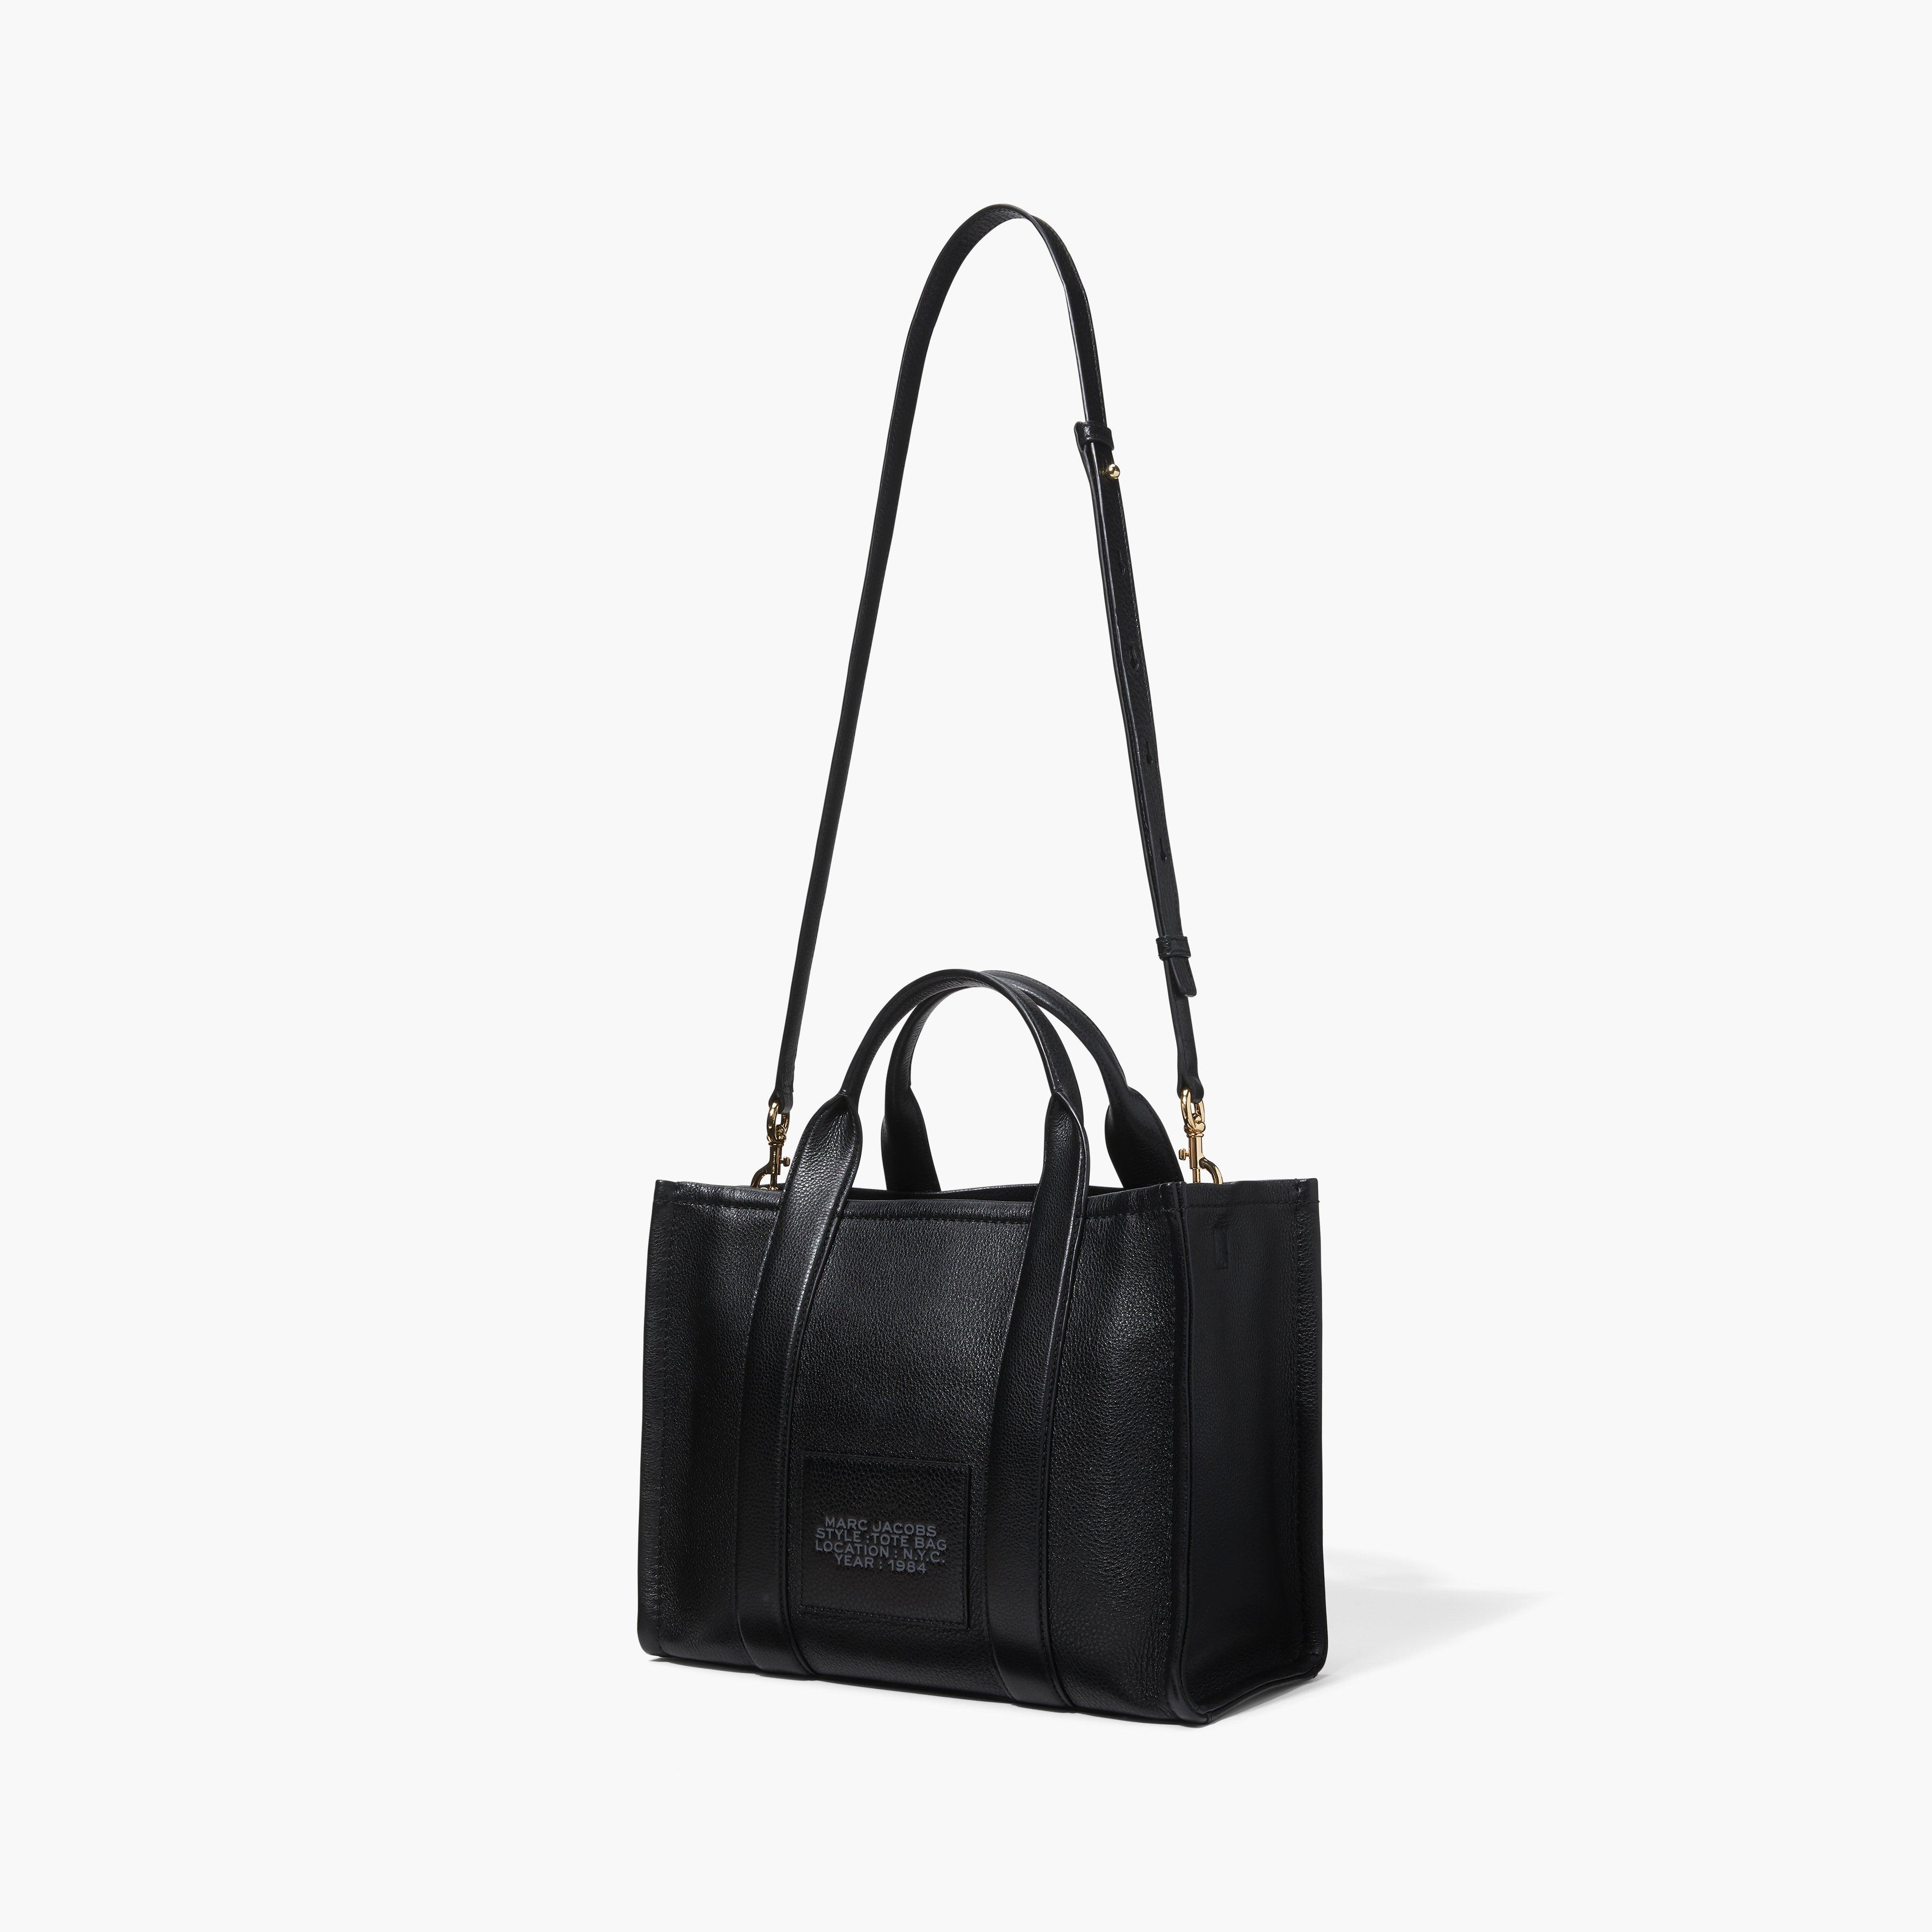 THE LEATHER SMALL TOTE BAG - 4